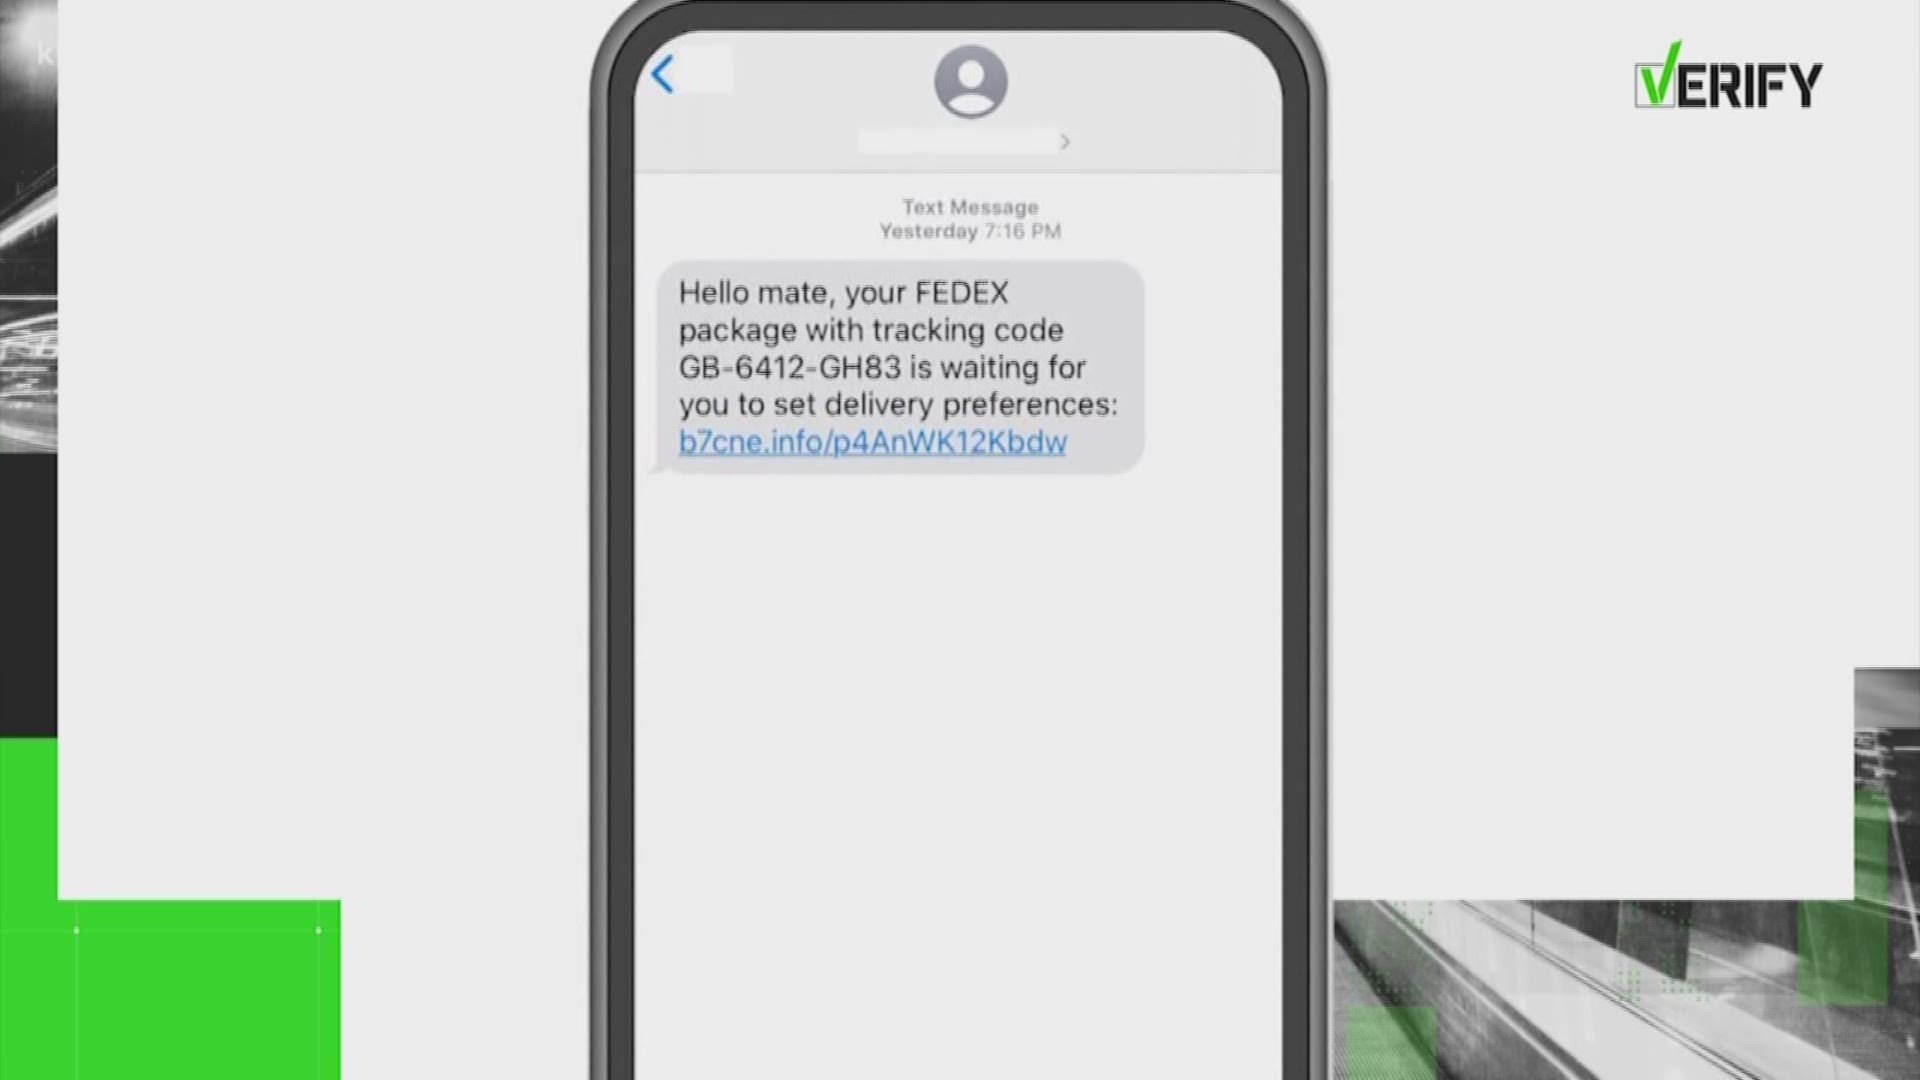 There's been a text message being sent to people that FedEx says has nothing to do with their company.